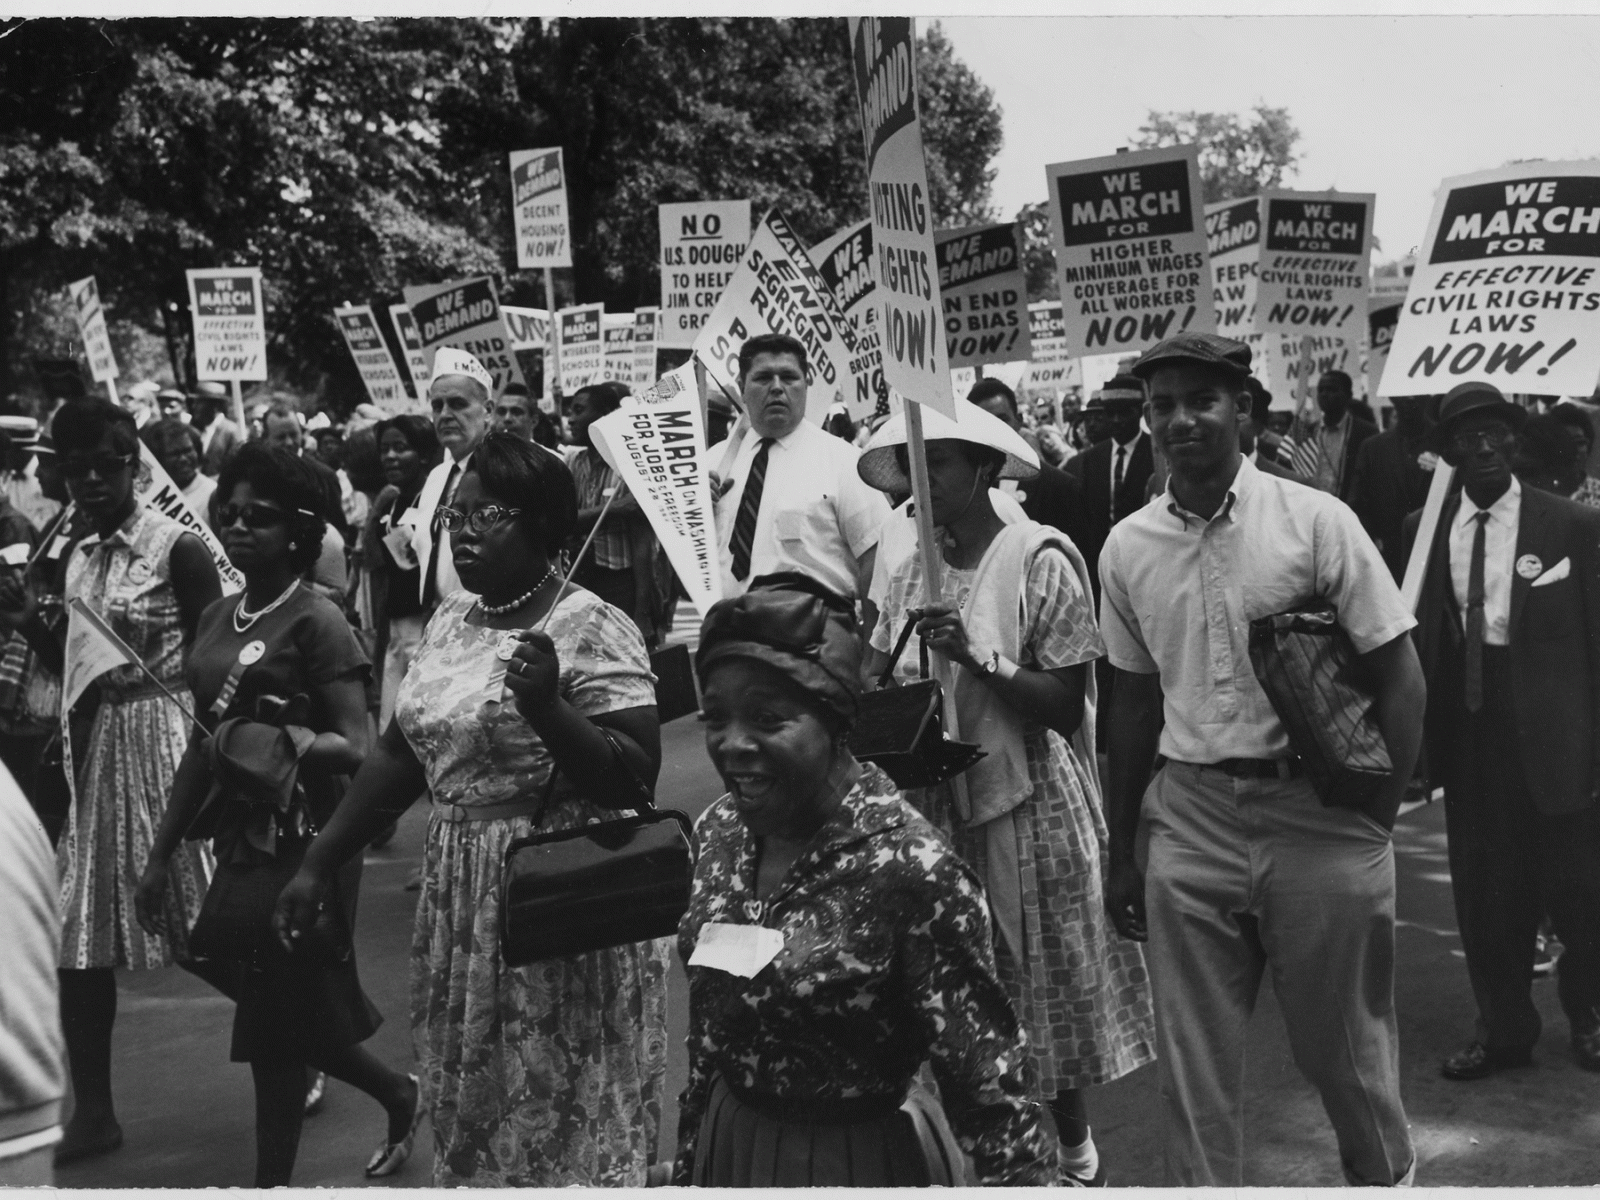 March on Washington for Jobs and Freedom, August 28, 1963 by Rowland Scherman Courtesy of National Archives and Records Administration